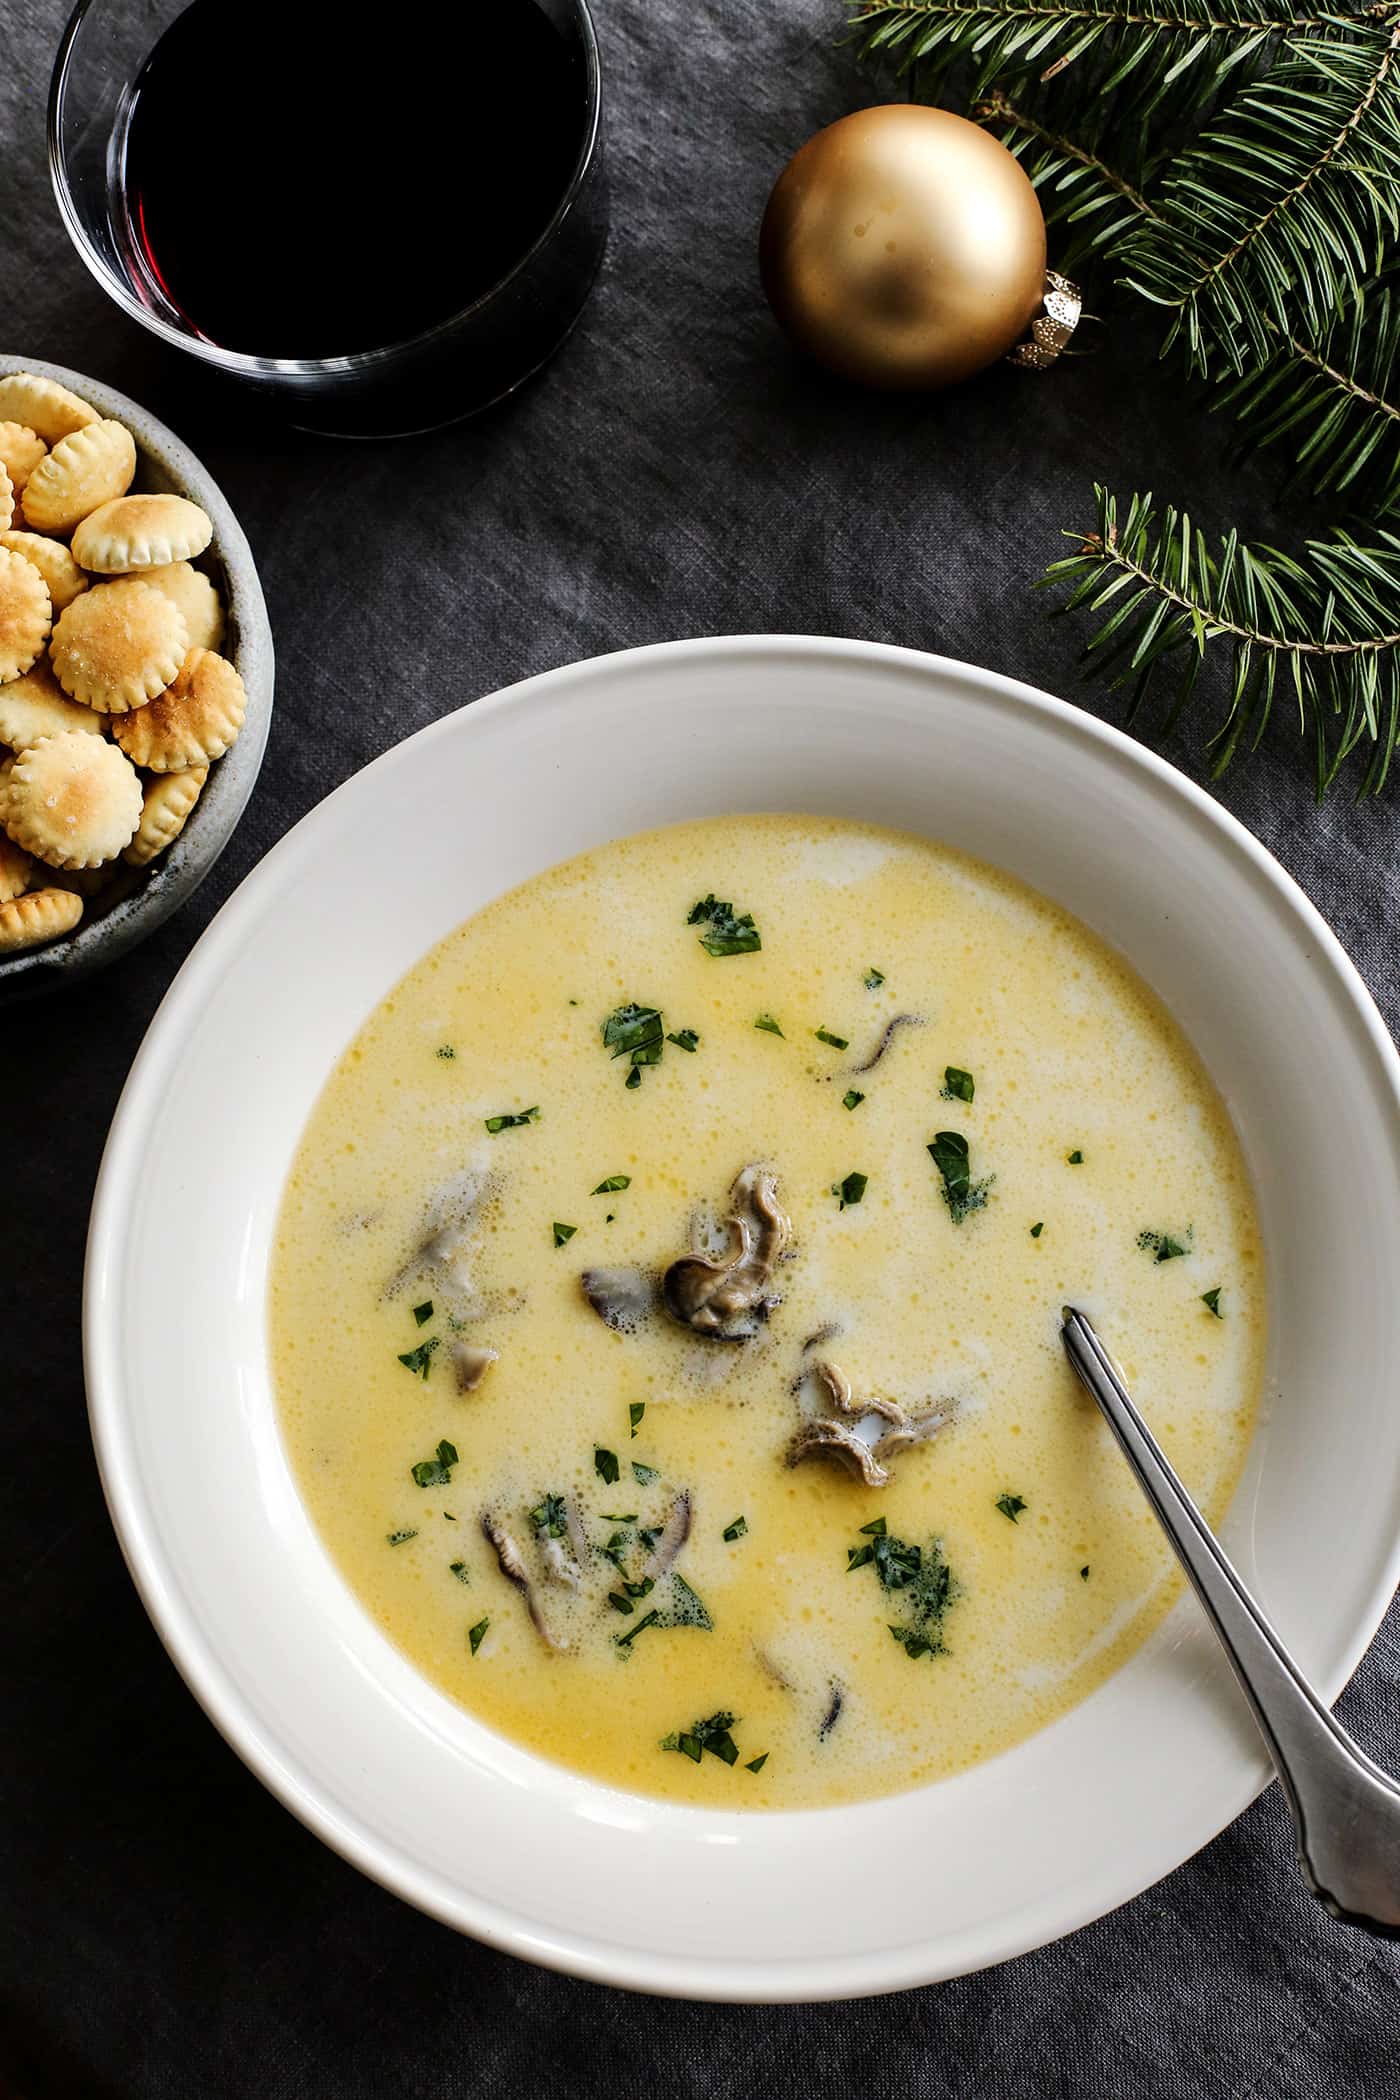 Oyster stew in a white bowl with a silver spoon